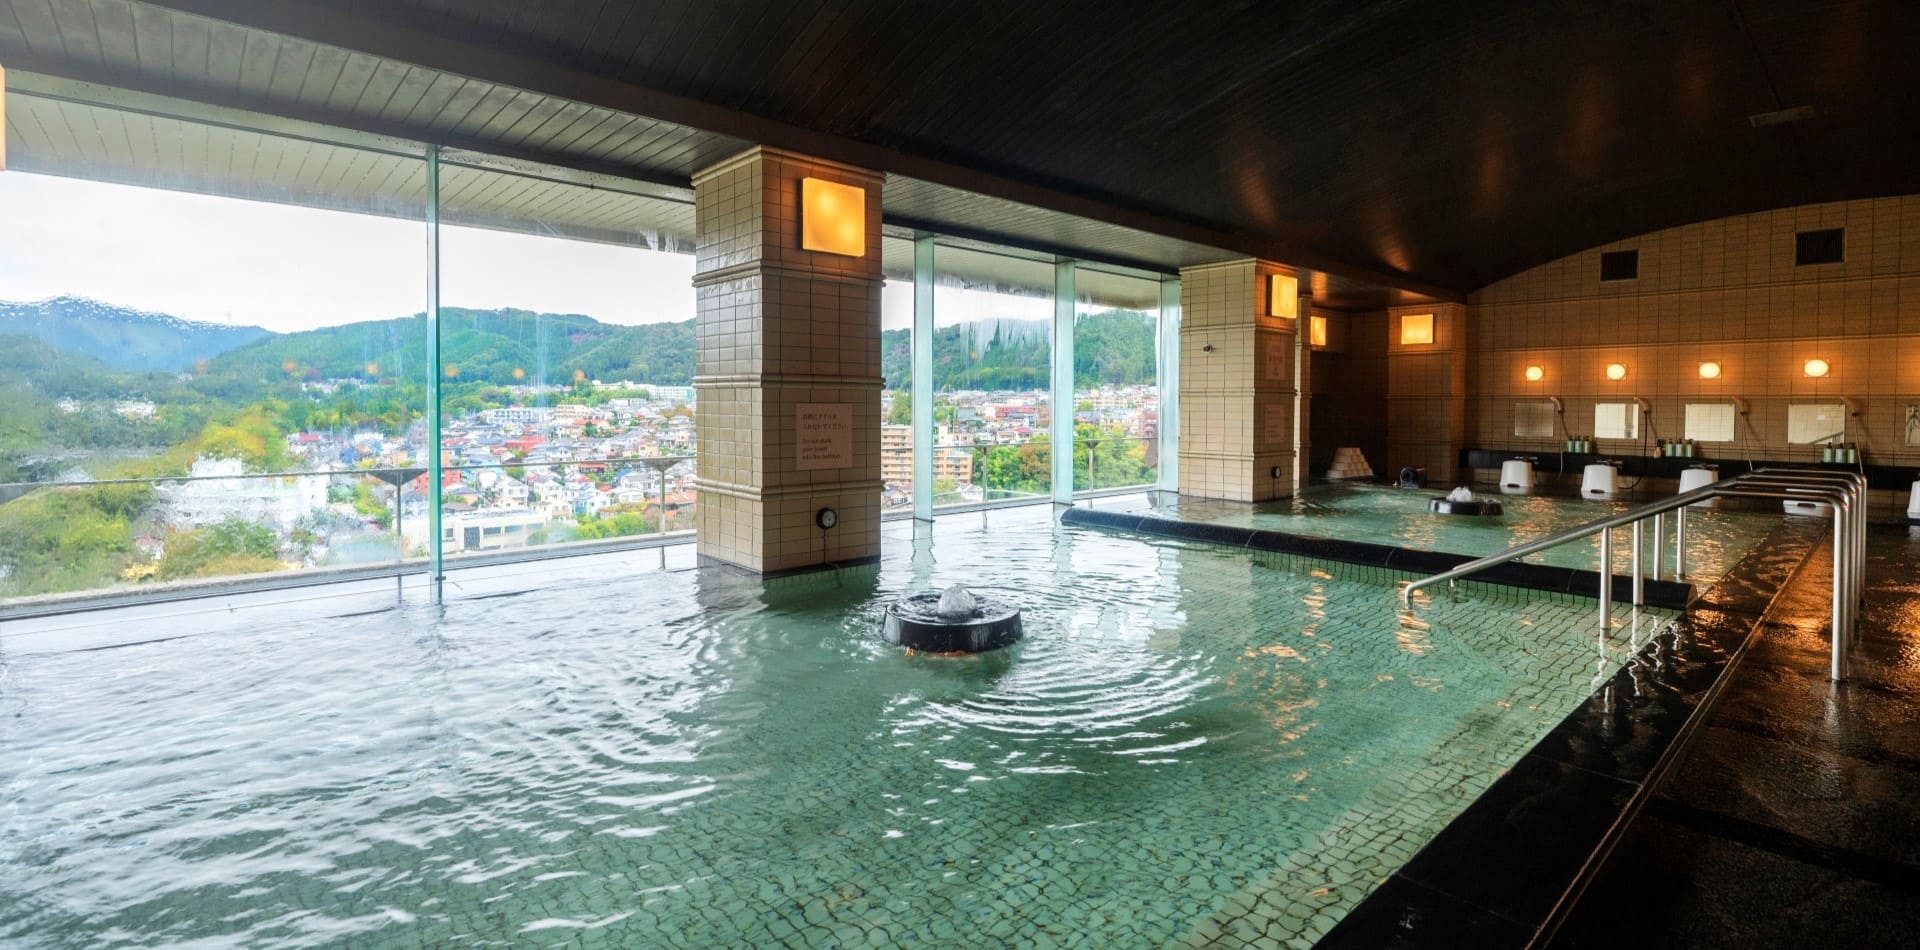 Enjoy views of the mountains of Okutama and the mountain stream of the Tama River from the large observation bath.